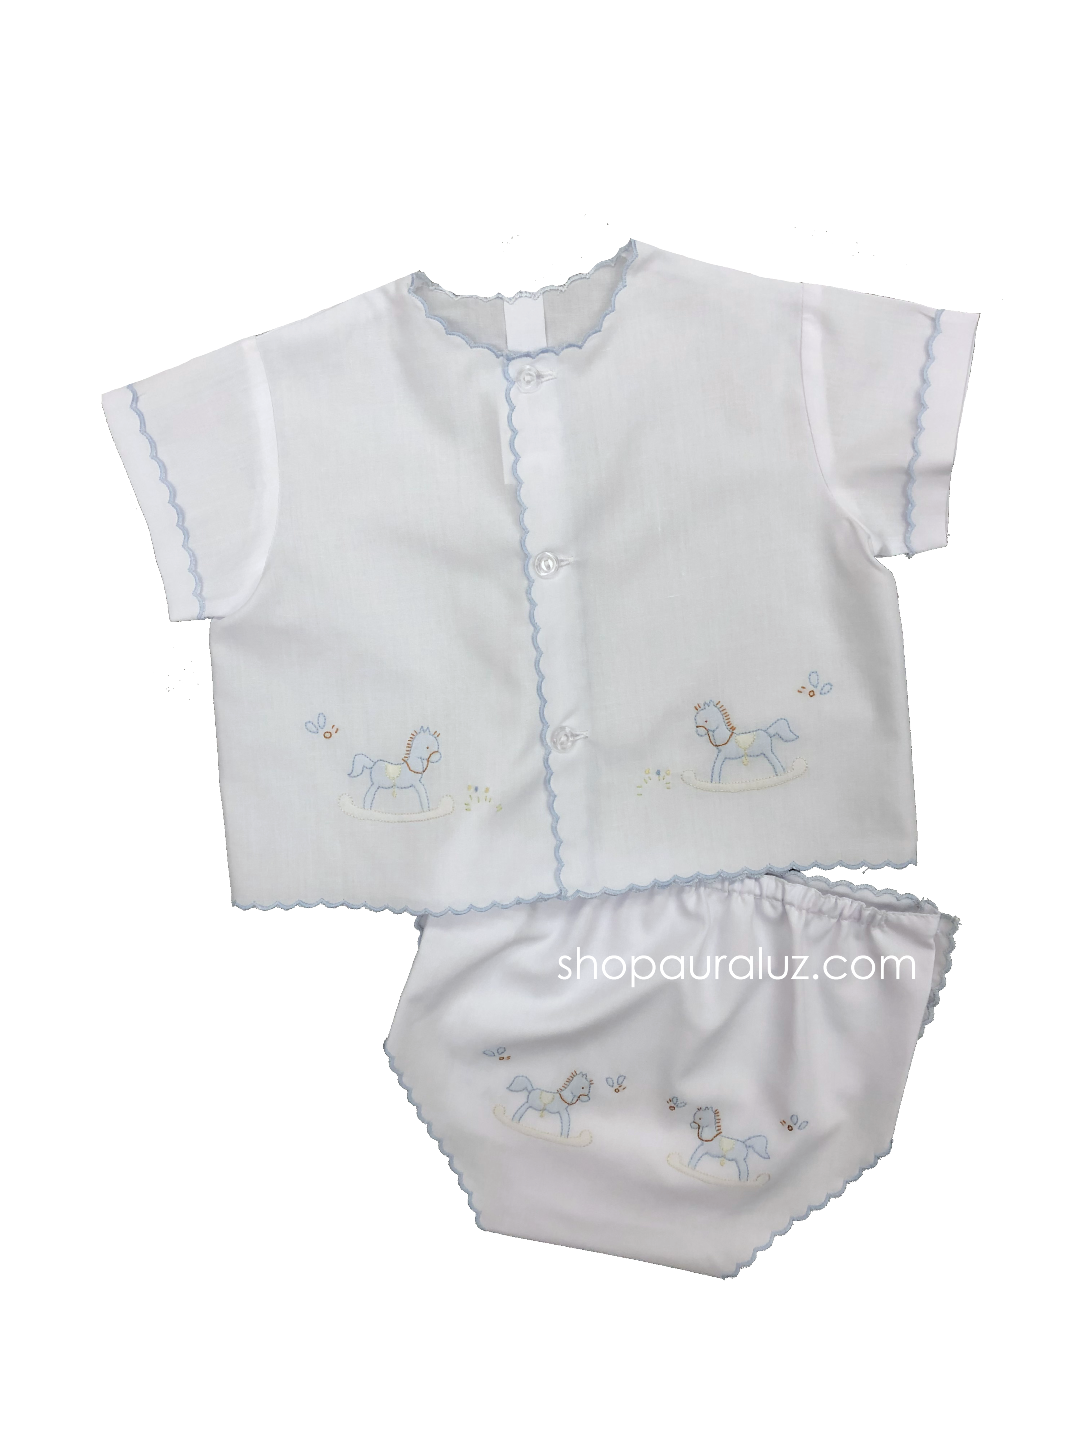 Auraluz Diaper shirt/cover set...White with blue scallops and embroidered horses